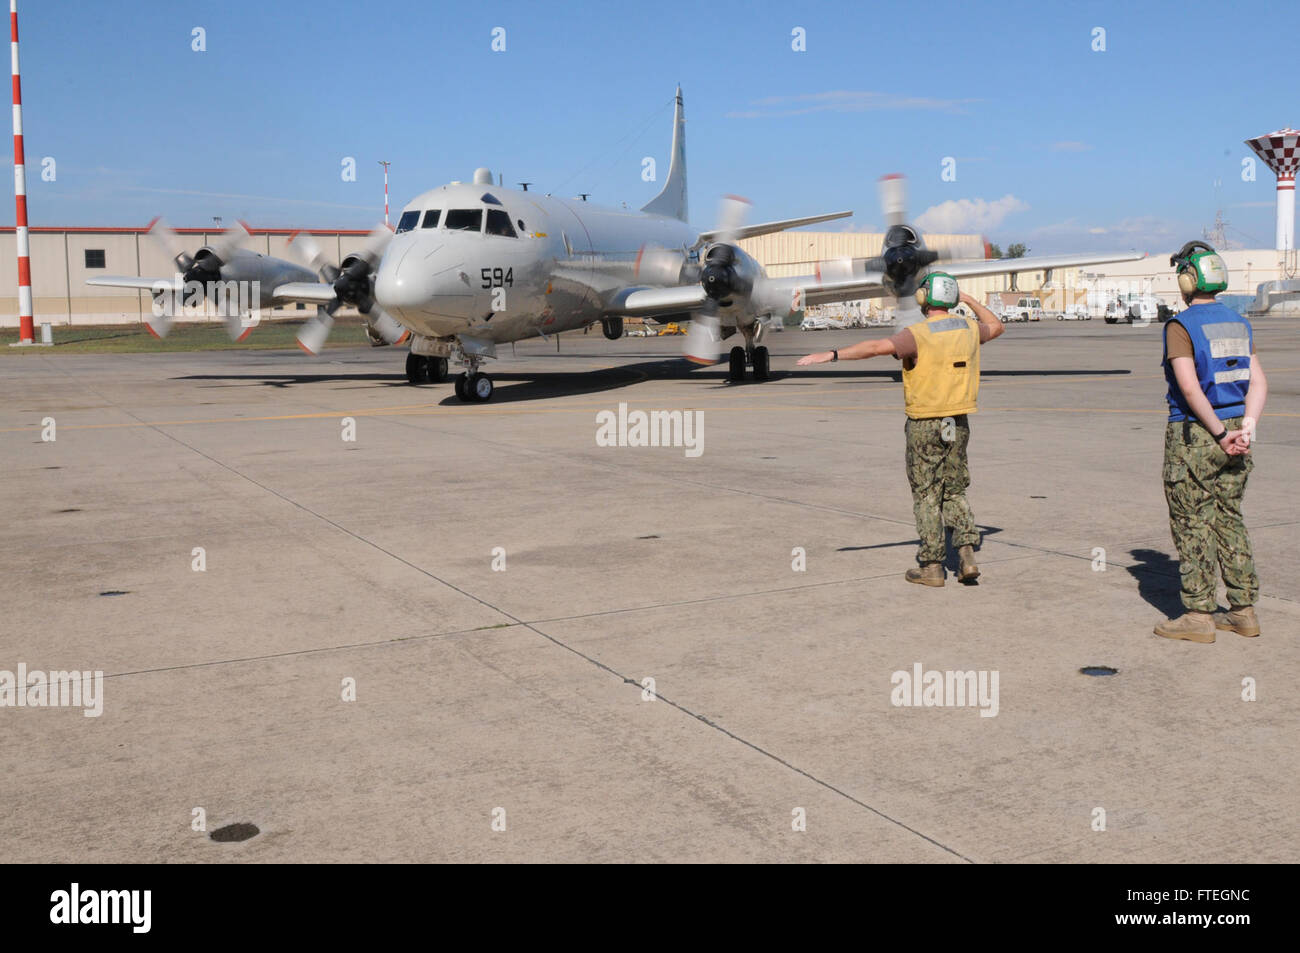 SIGONELLA, Sicily (Oct. 6, 2014) - Aviation Machinists Mate 3rd Class Jason Conyers launches a P-3C Orion maritime patrol aircraft attached to Patrol Squadron FOUR (VP-4). VP-4 is conducting naval operations in the U.S. 6th Fleet area of operations in support of U.S. national security and interests in Europe. Stock Photo